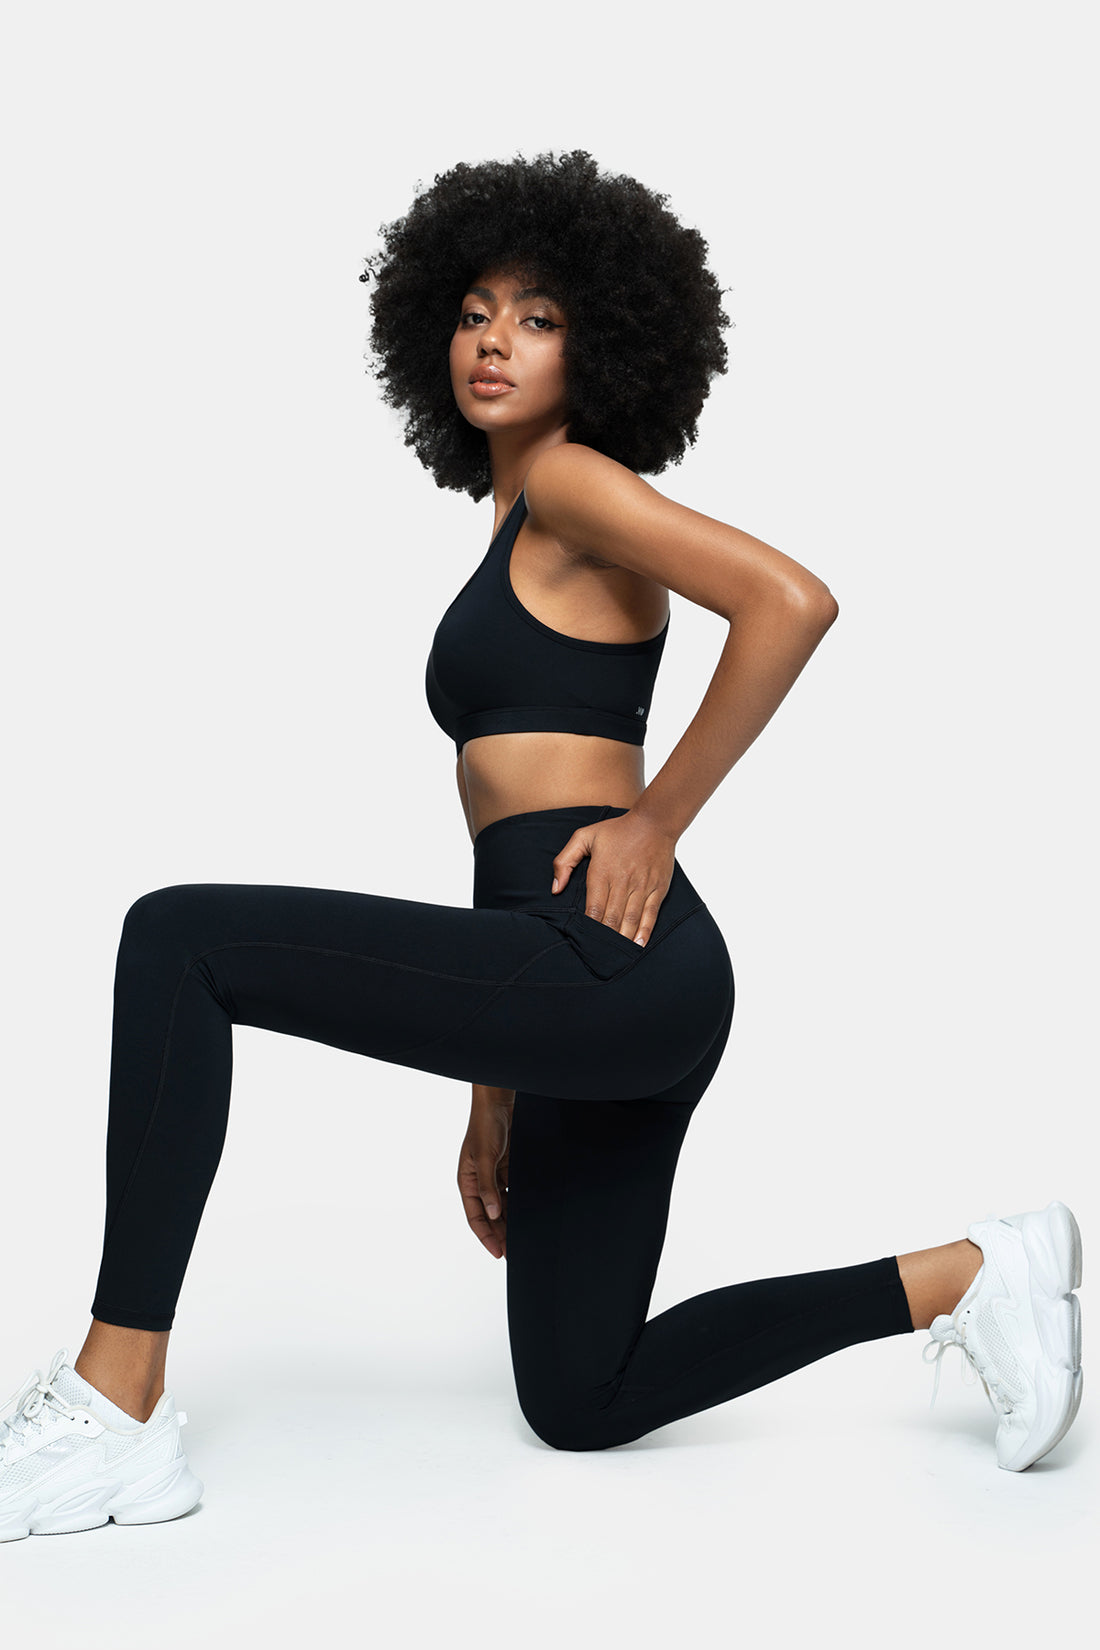 Performance High-Rise Leggings with Contoured Lines